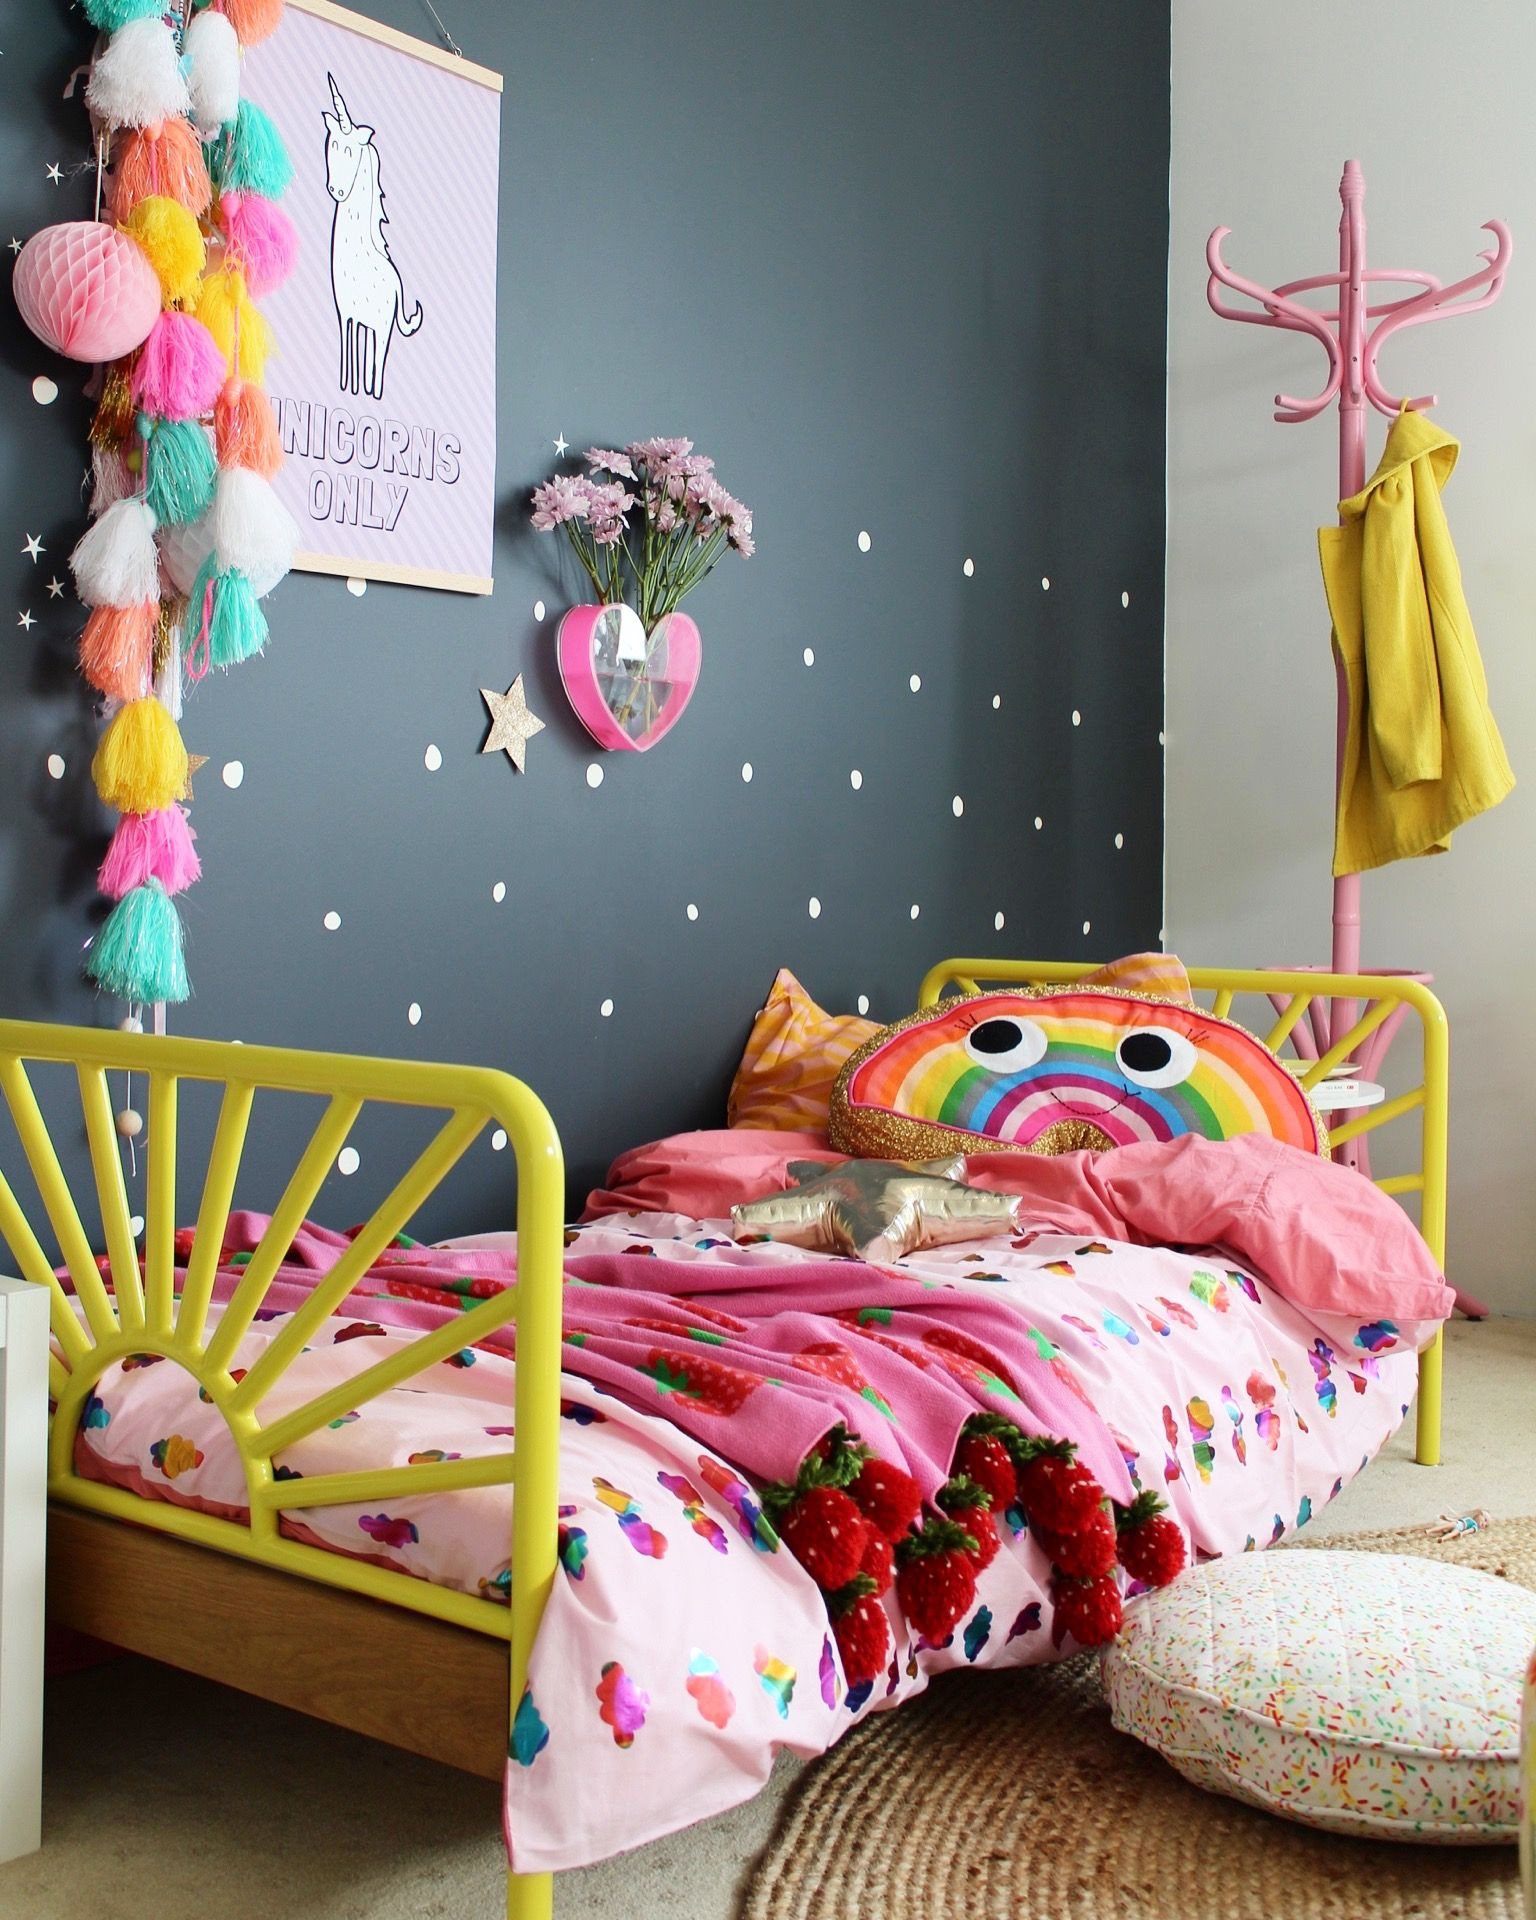 DIY Kids Bedroom
 Cloudy With a Chance of Rainbows